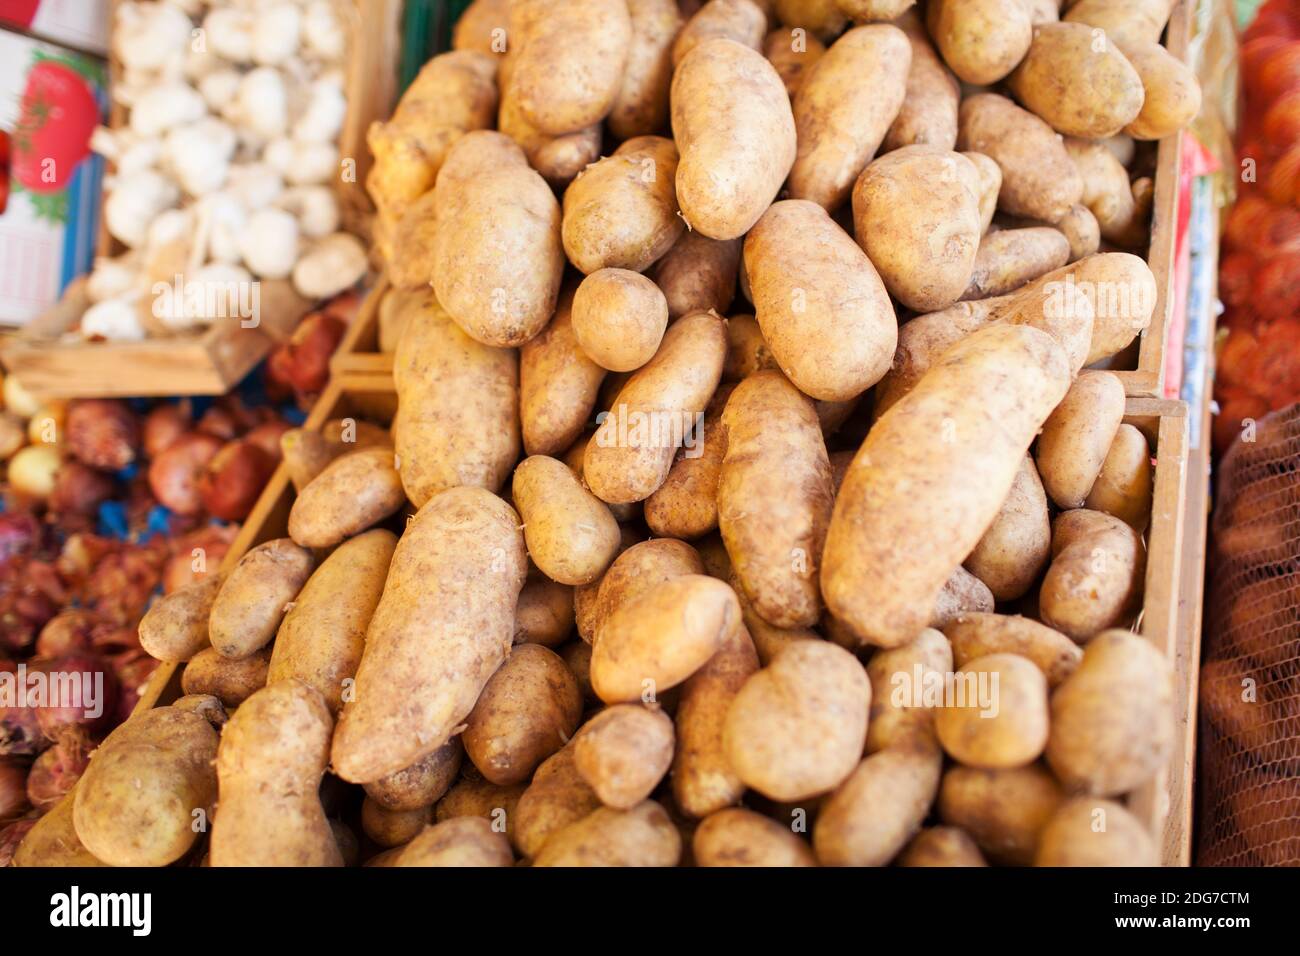 Brown Skin Potatoes Piled in Crates at Food Market Stock Photo